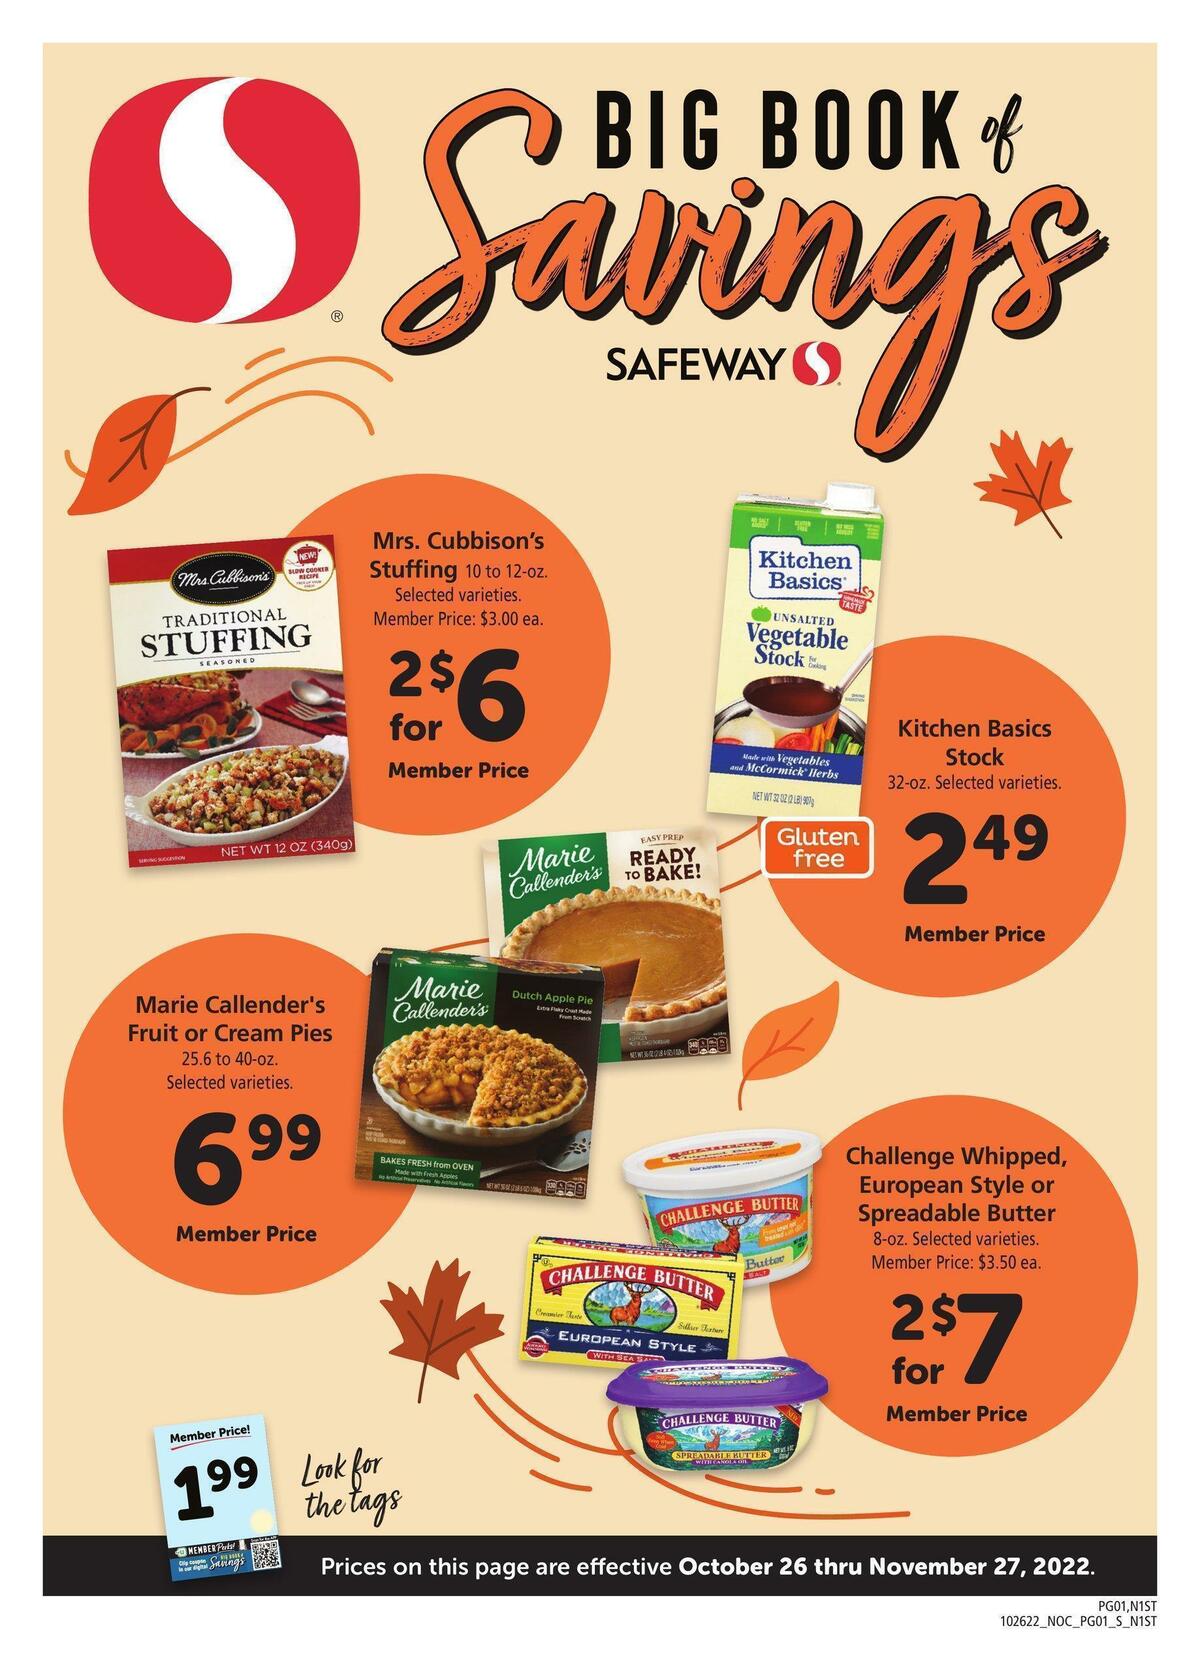 Safeway Big Book of Savings Weekly Ad from October 26